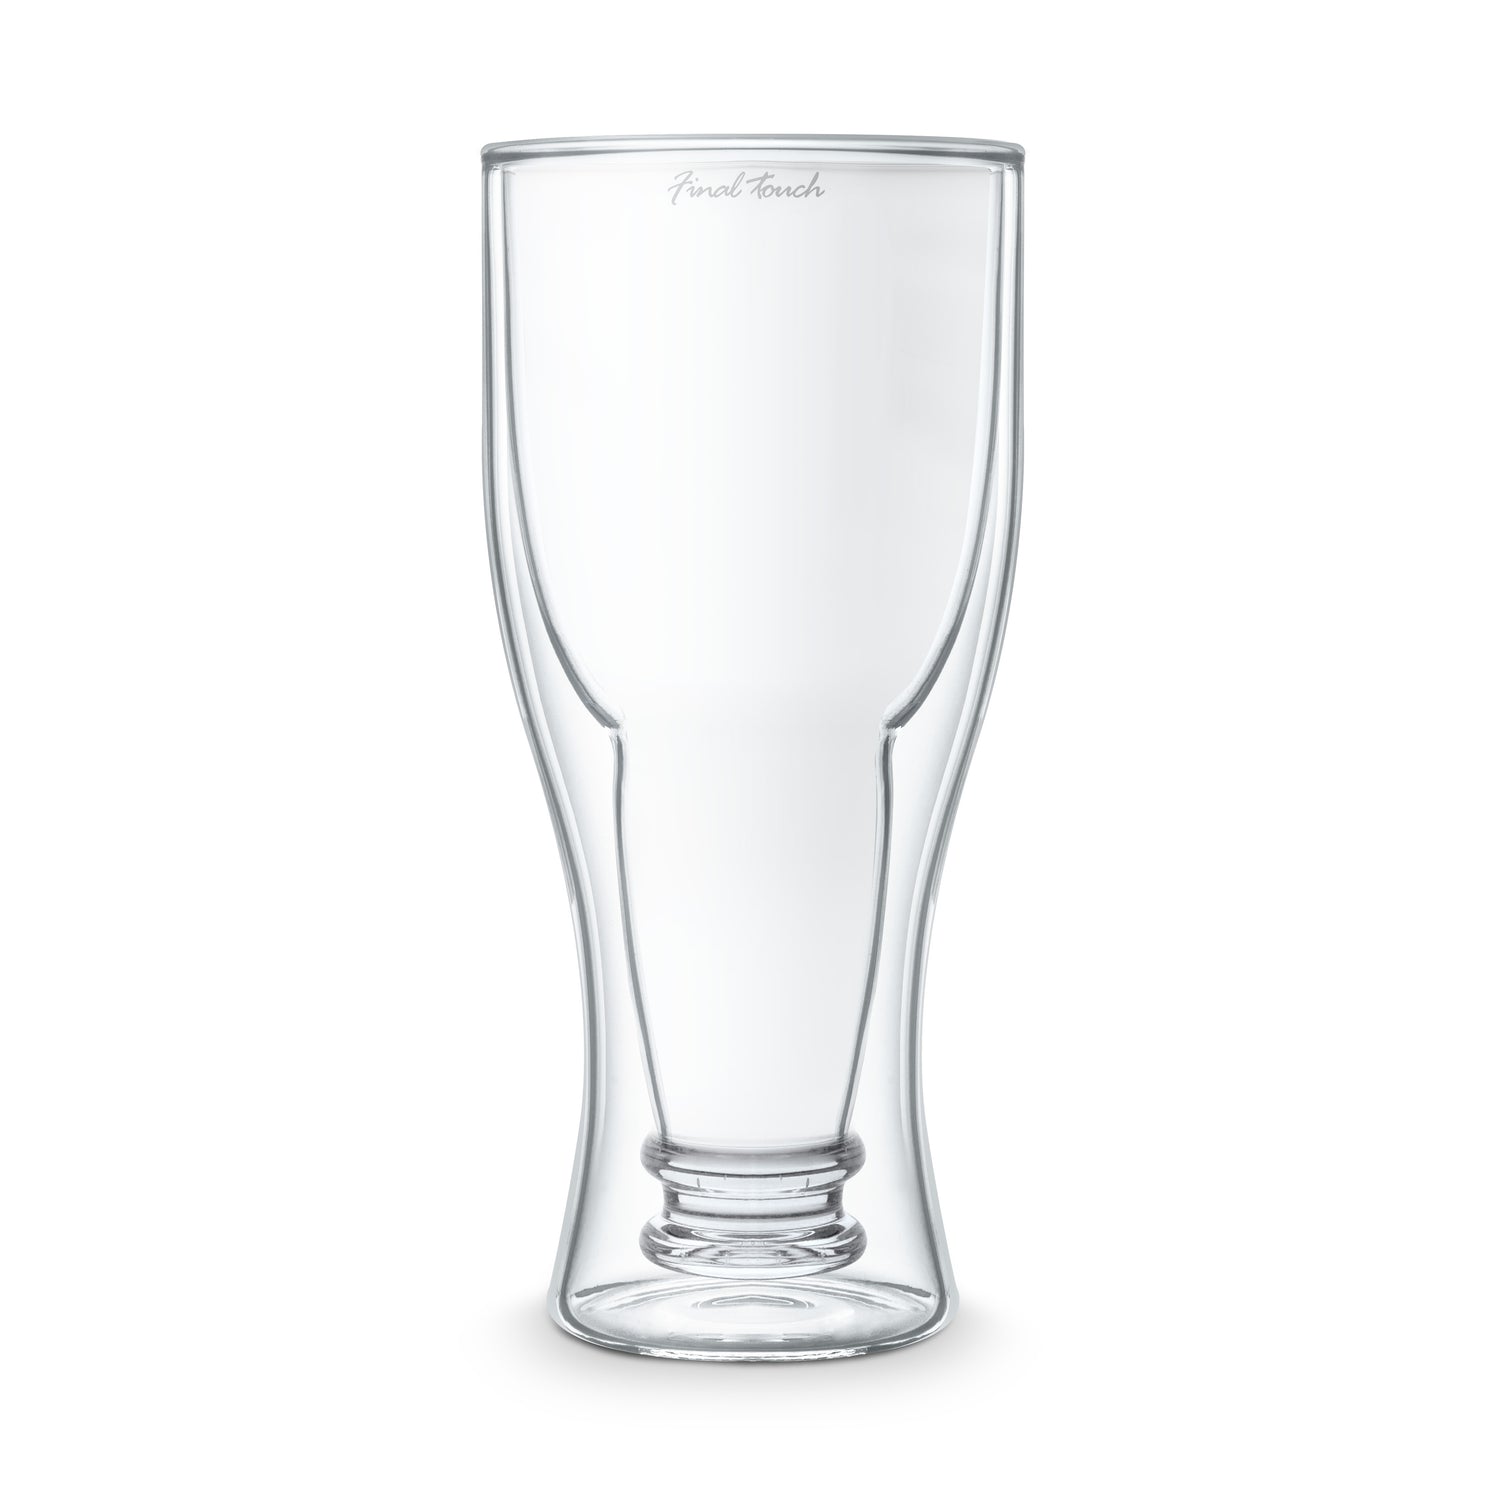 Bottoms Up Beer Glass